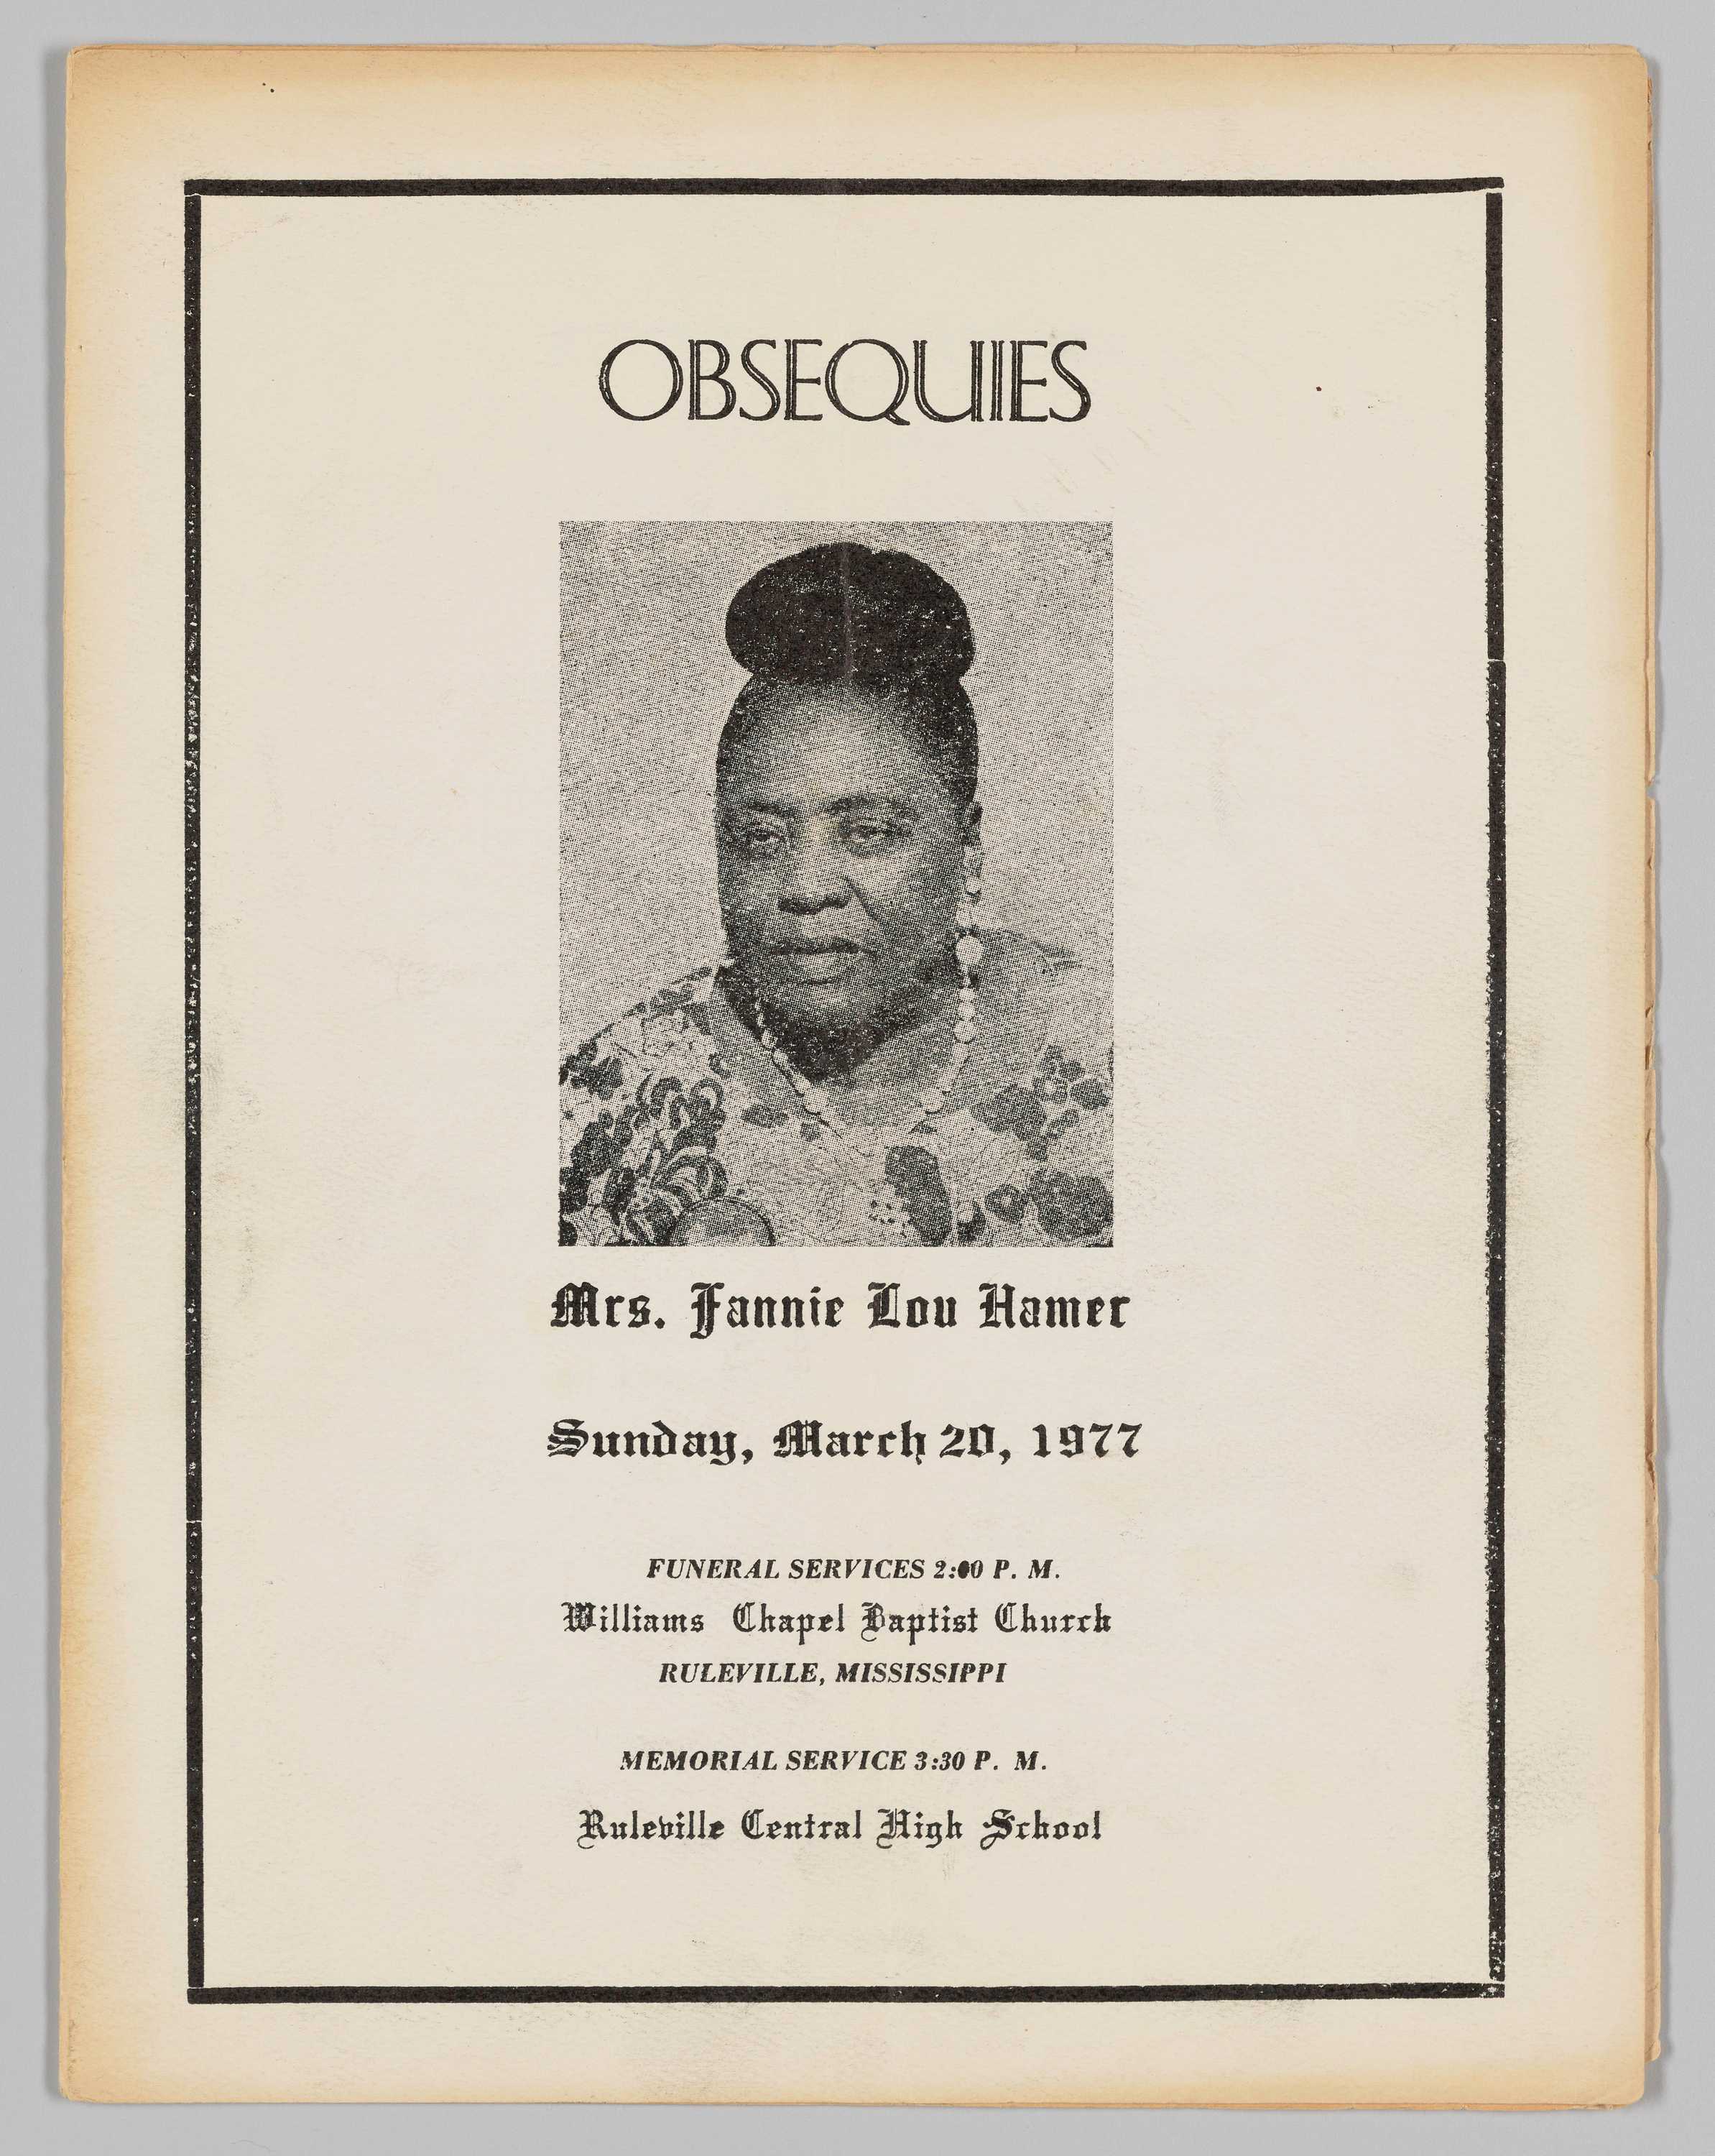 Image of funeral program for Fannie Lou Hamer featuring a photograph of her.